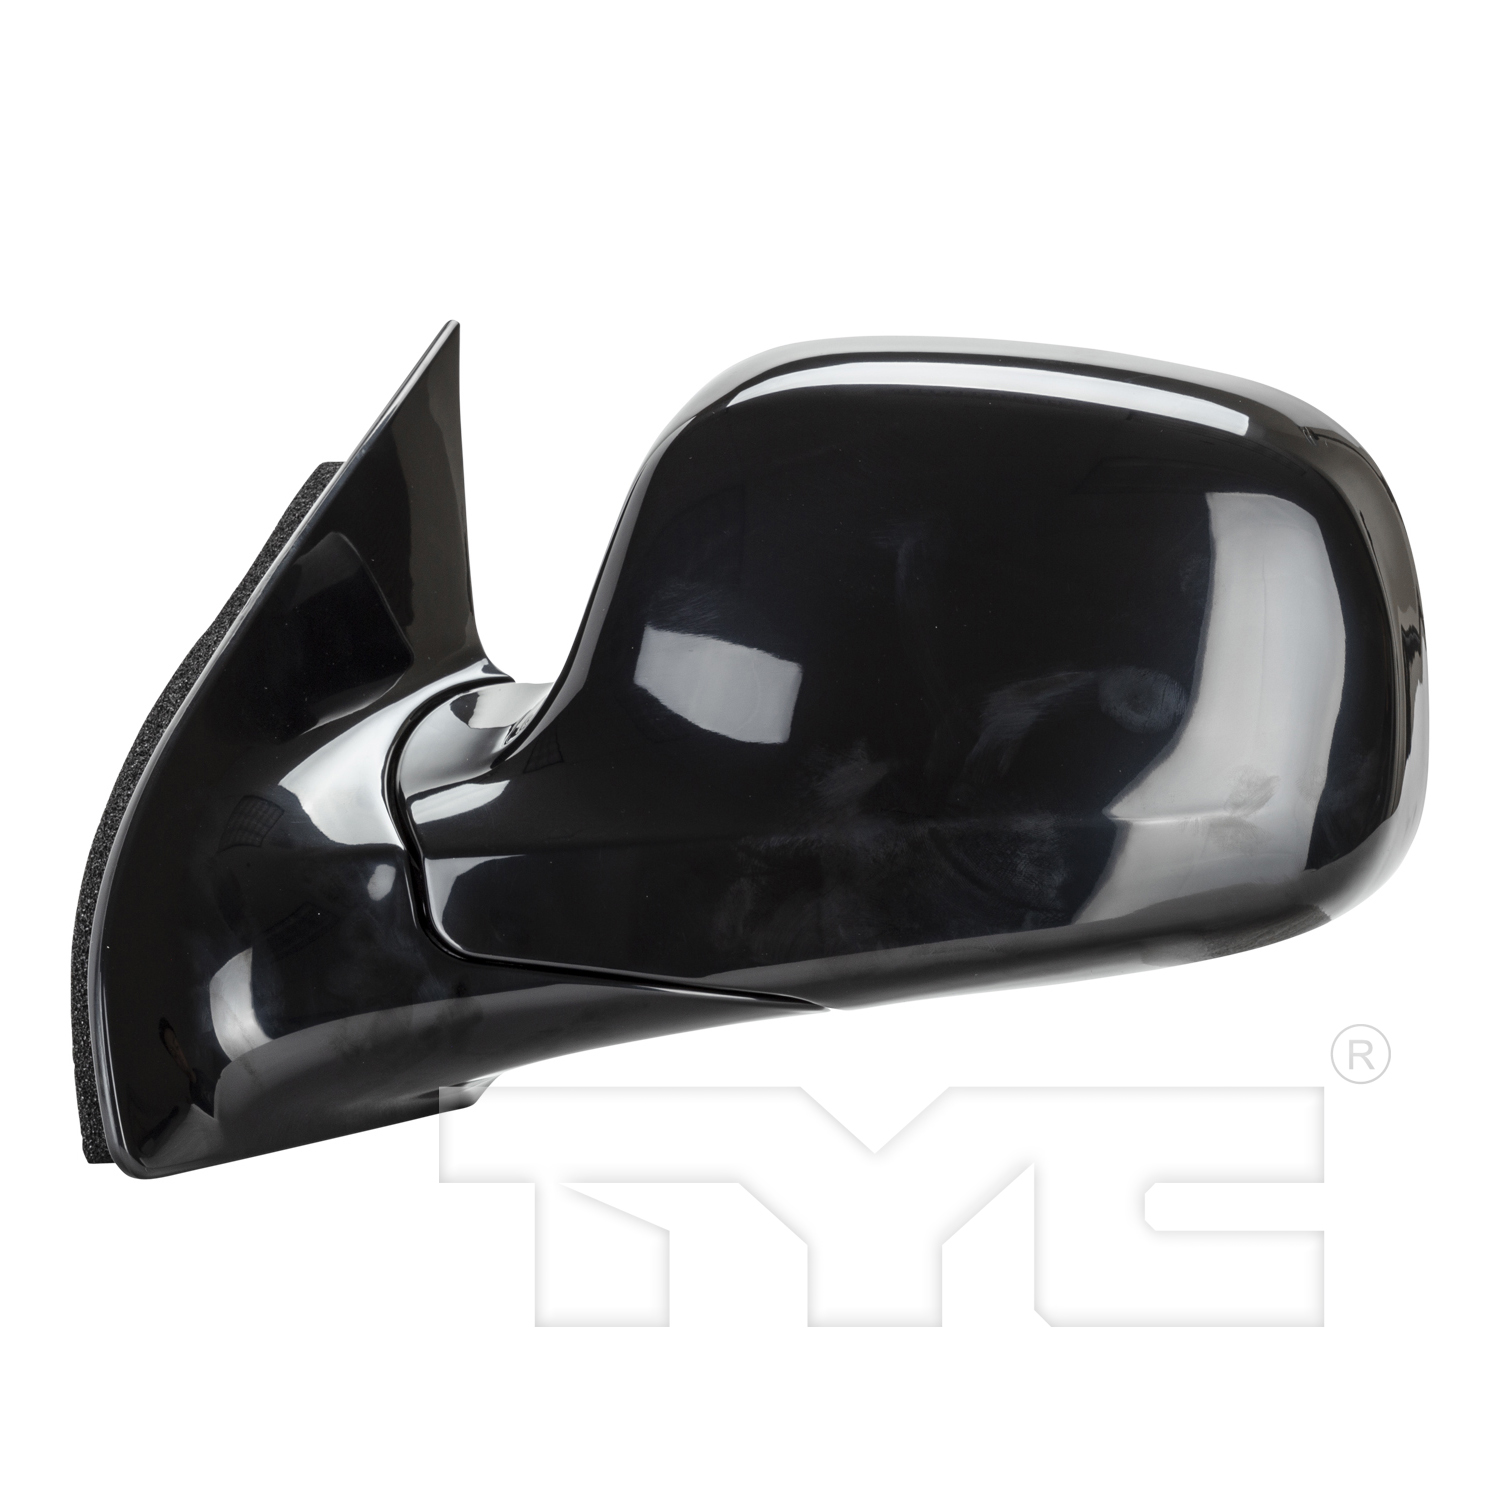 Aftermarket MIRRORS for BUICK - RENDEZVOUS, RENDEZVOUS,02-07,LT Mirror outside rear view